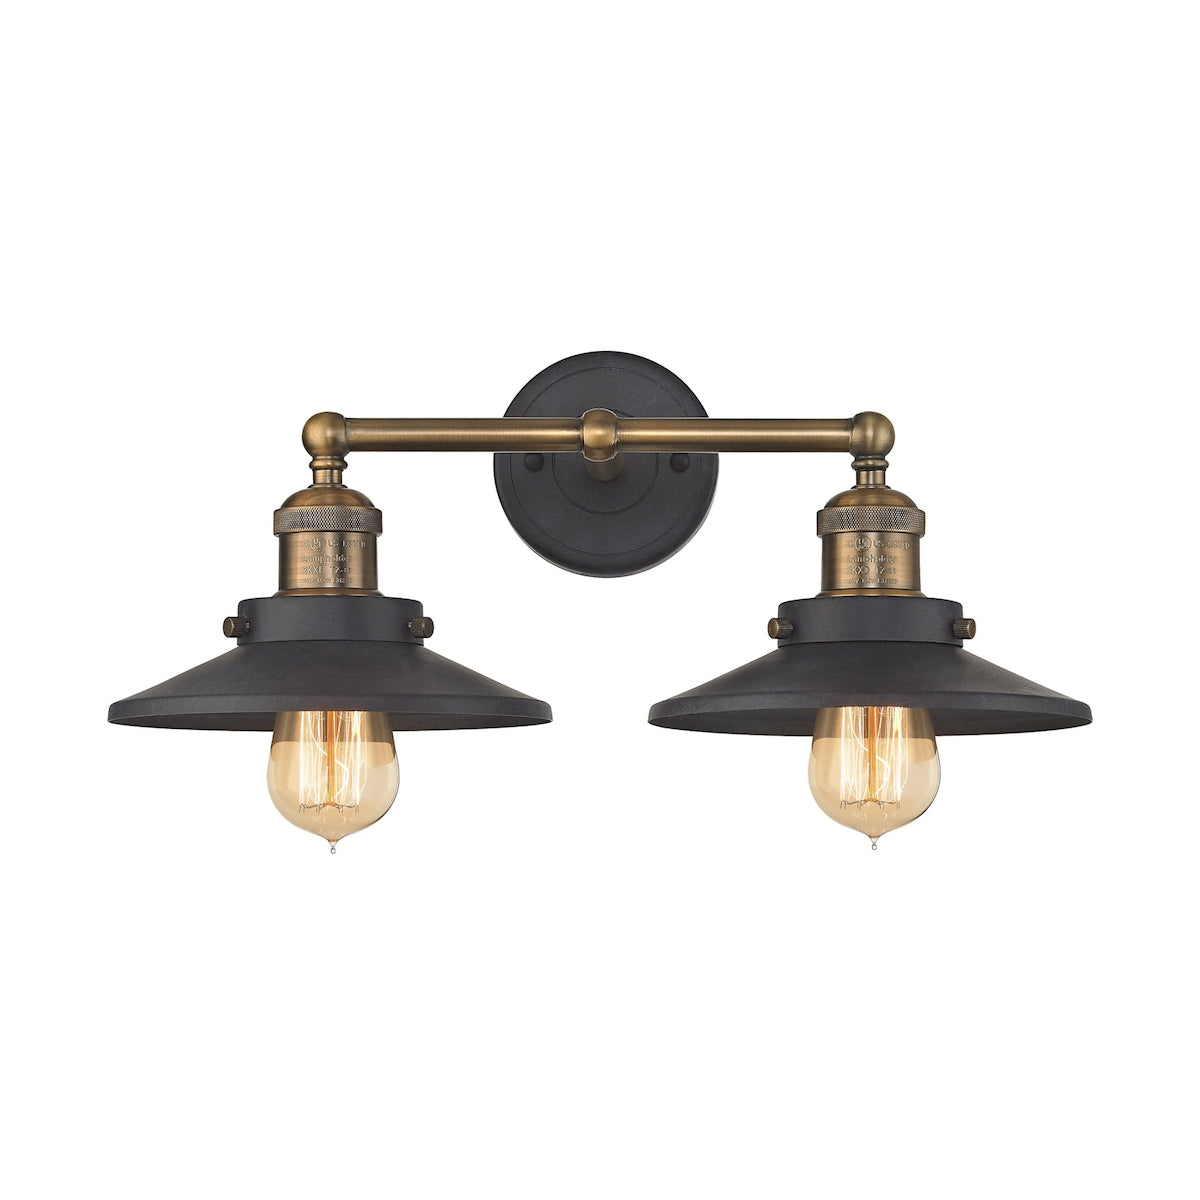 ELK Lighting 67181/2 English Pub 2-Light Vanity Lamp in Antique Brass and Tarnished Graphite with Metal Shade